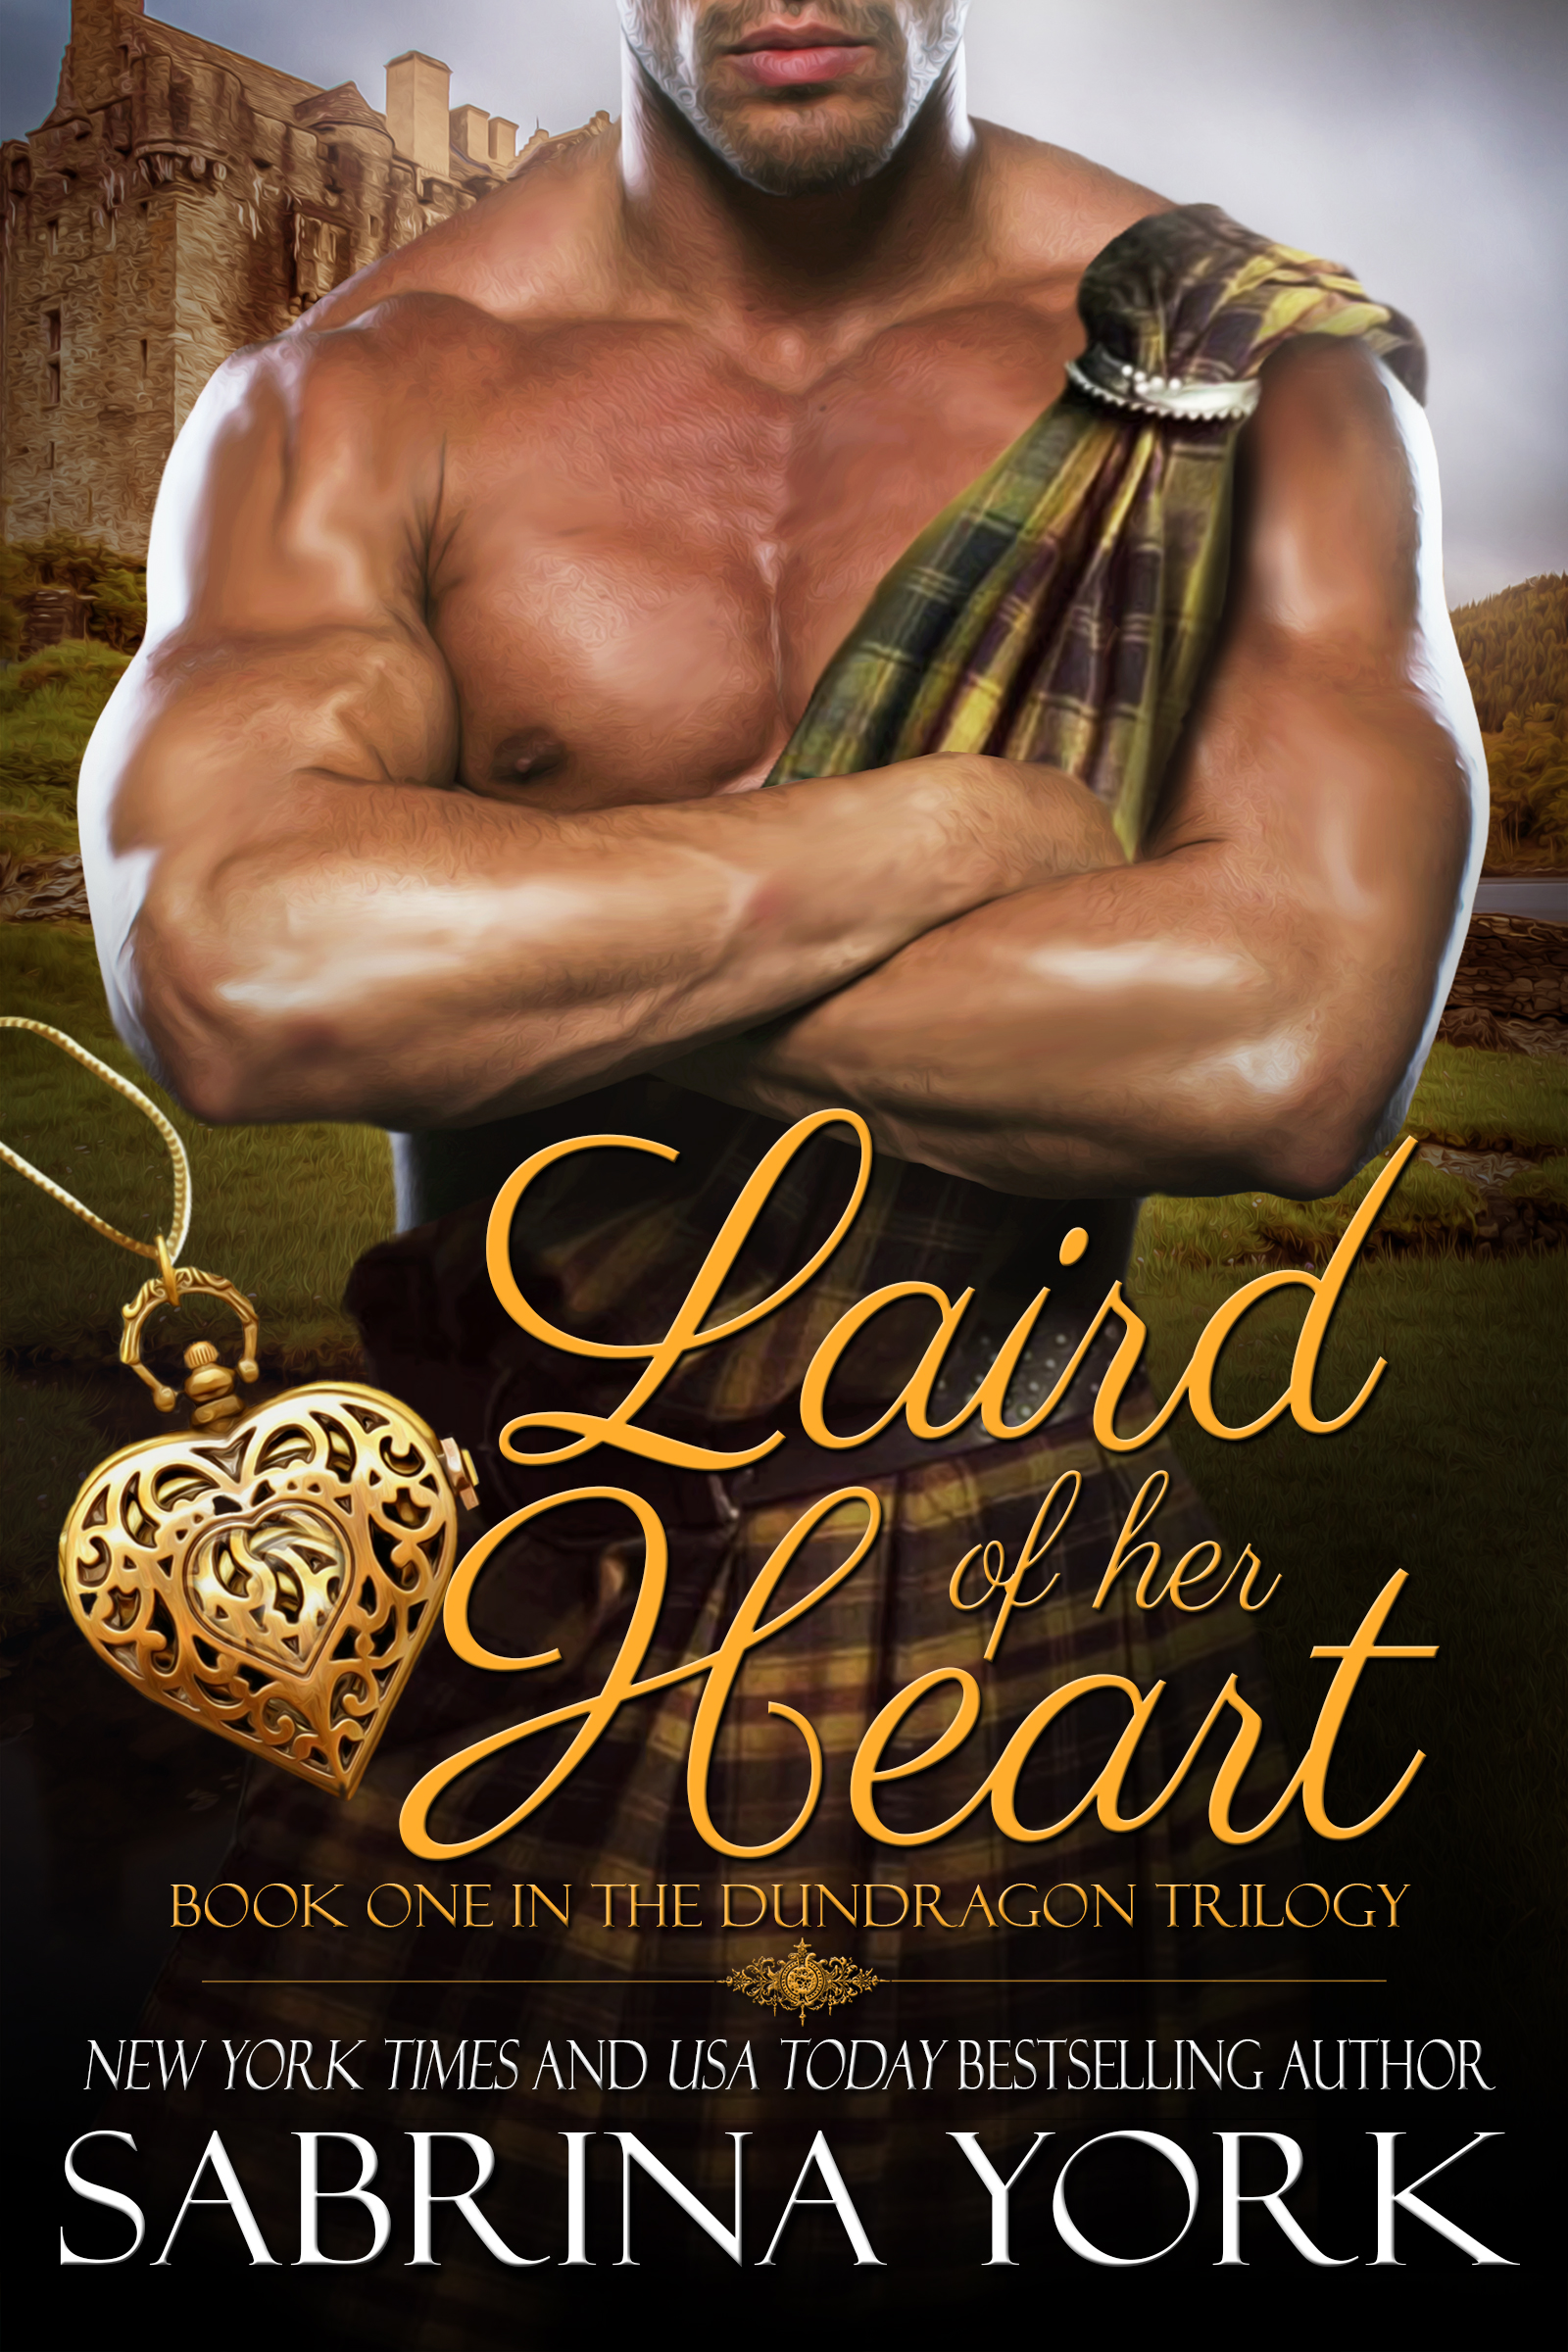 laird-of-her-heart-e-reader